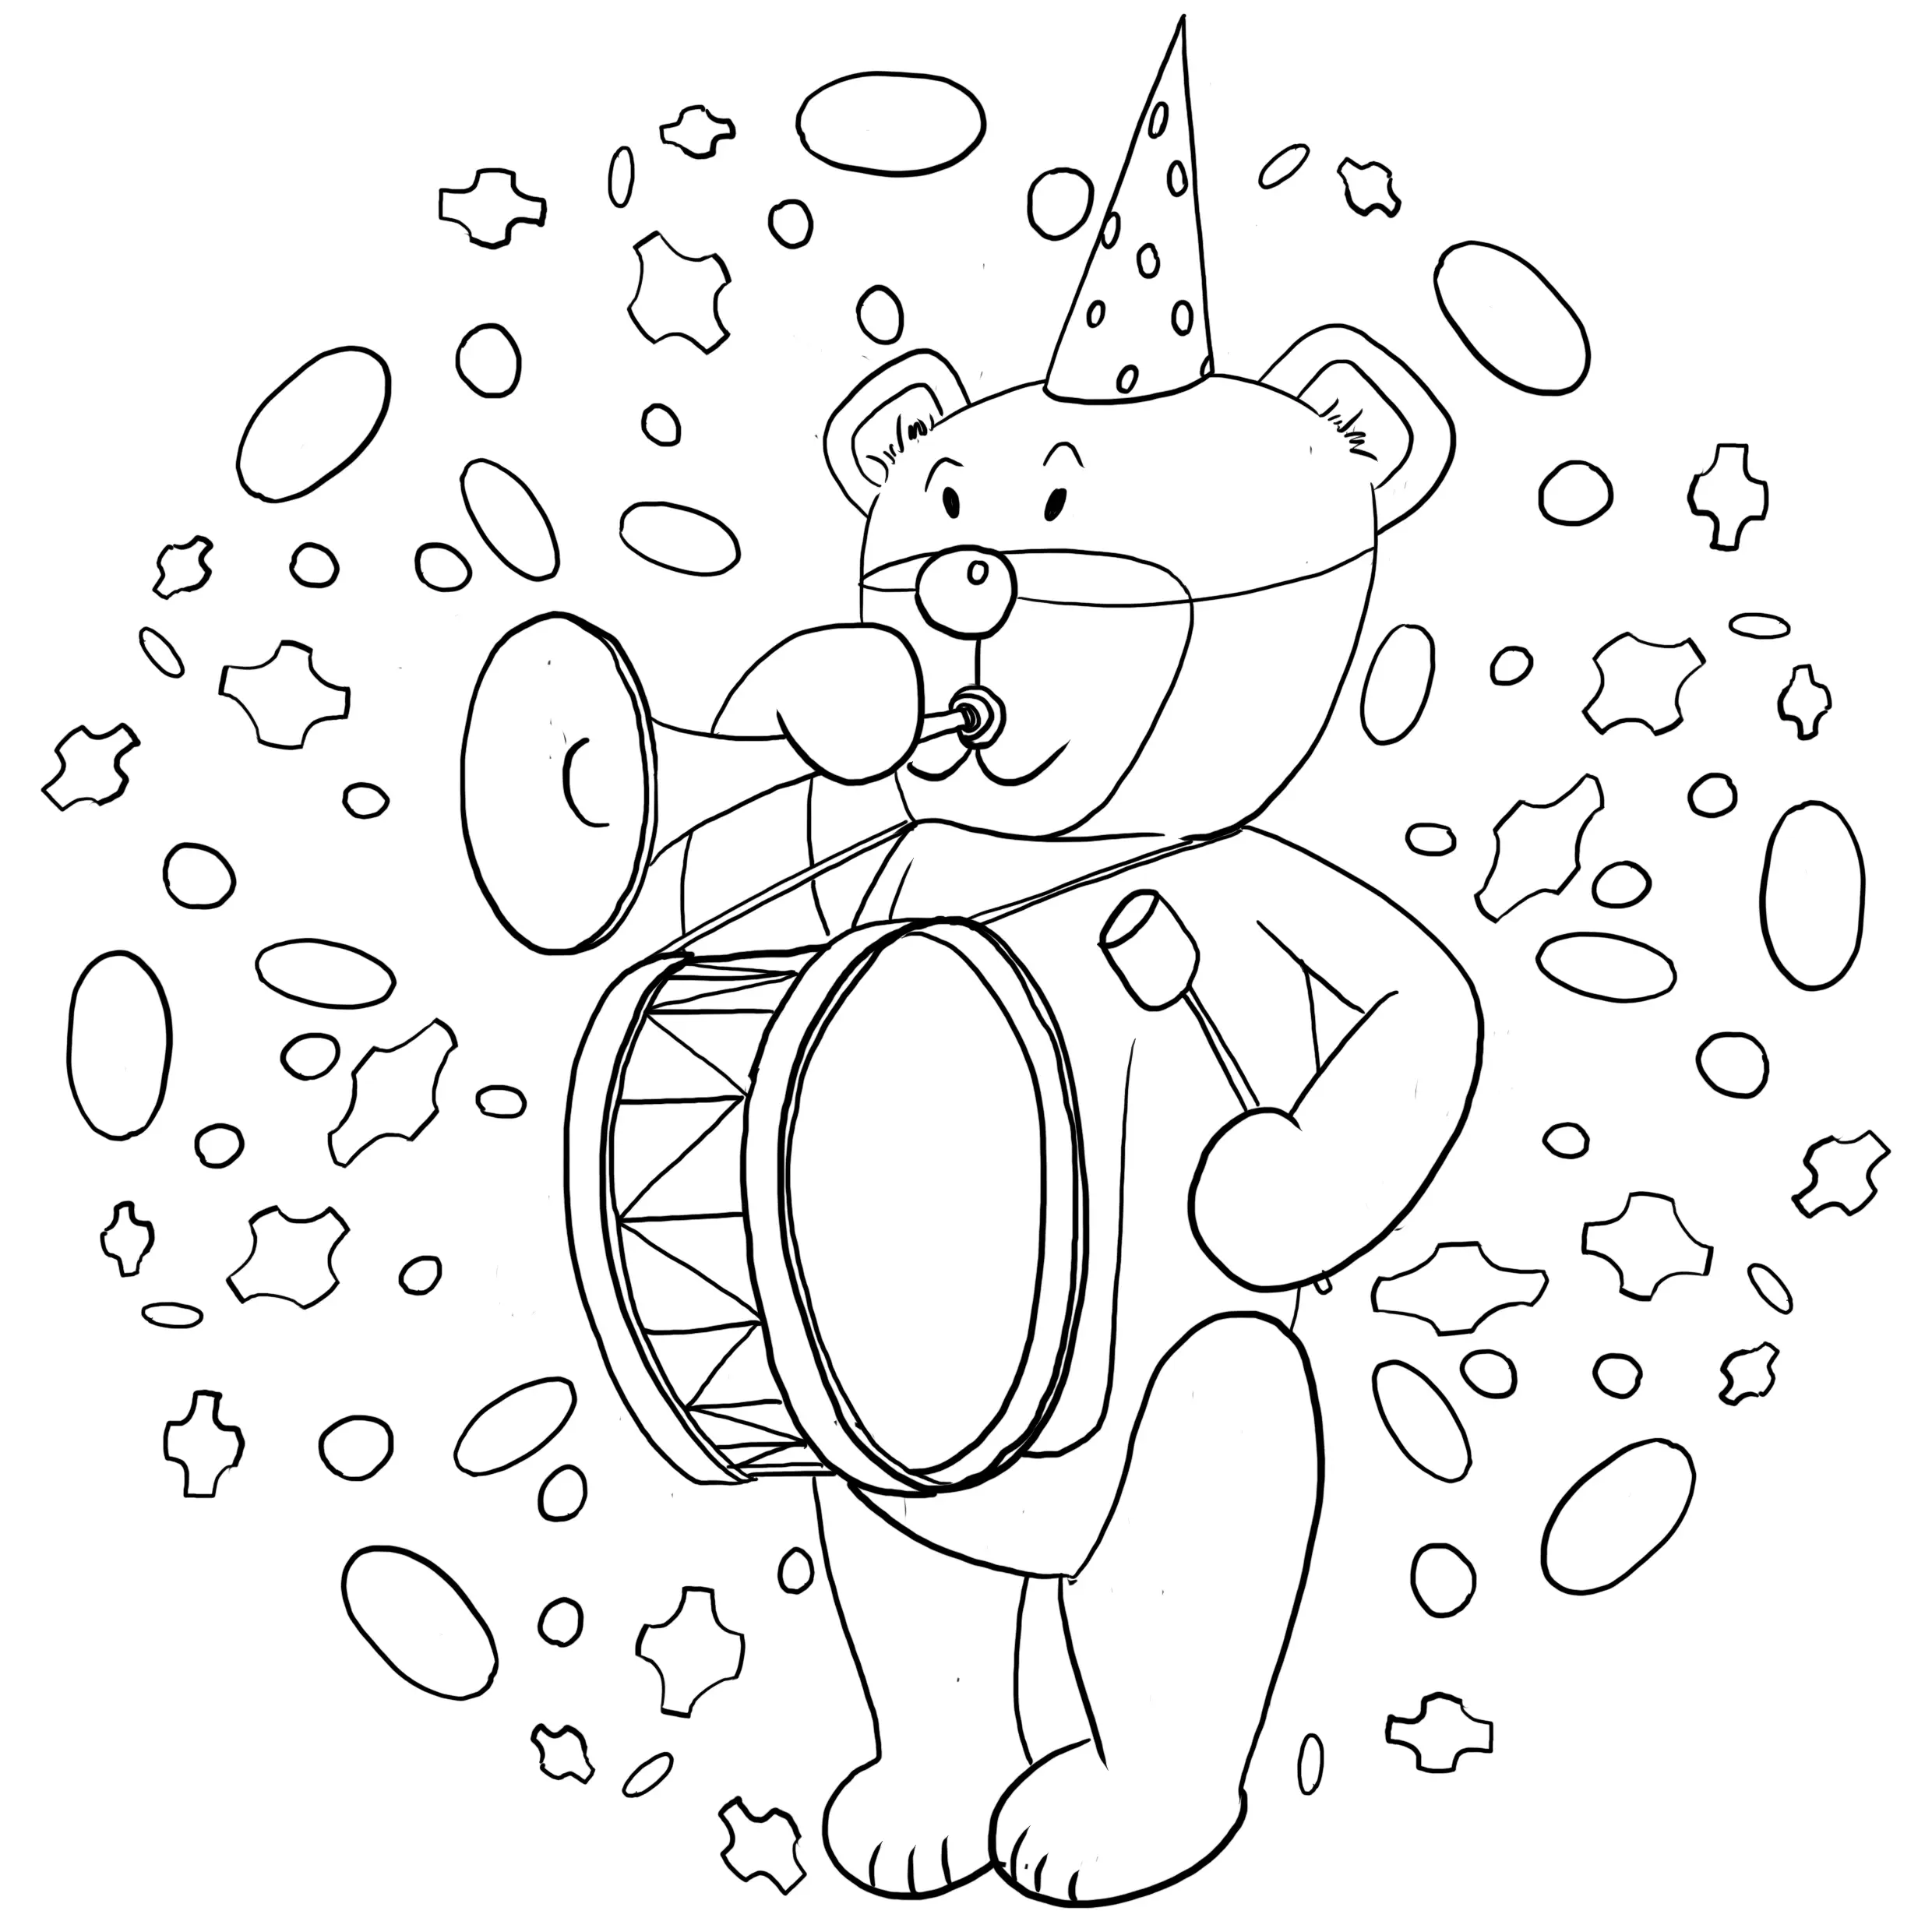 Carnival Coloring Page for Kids